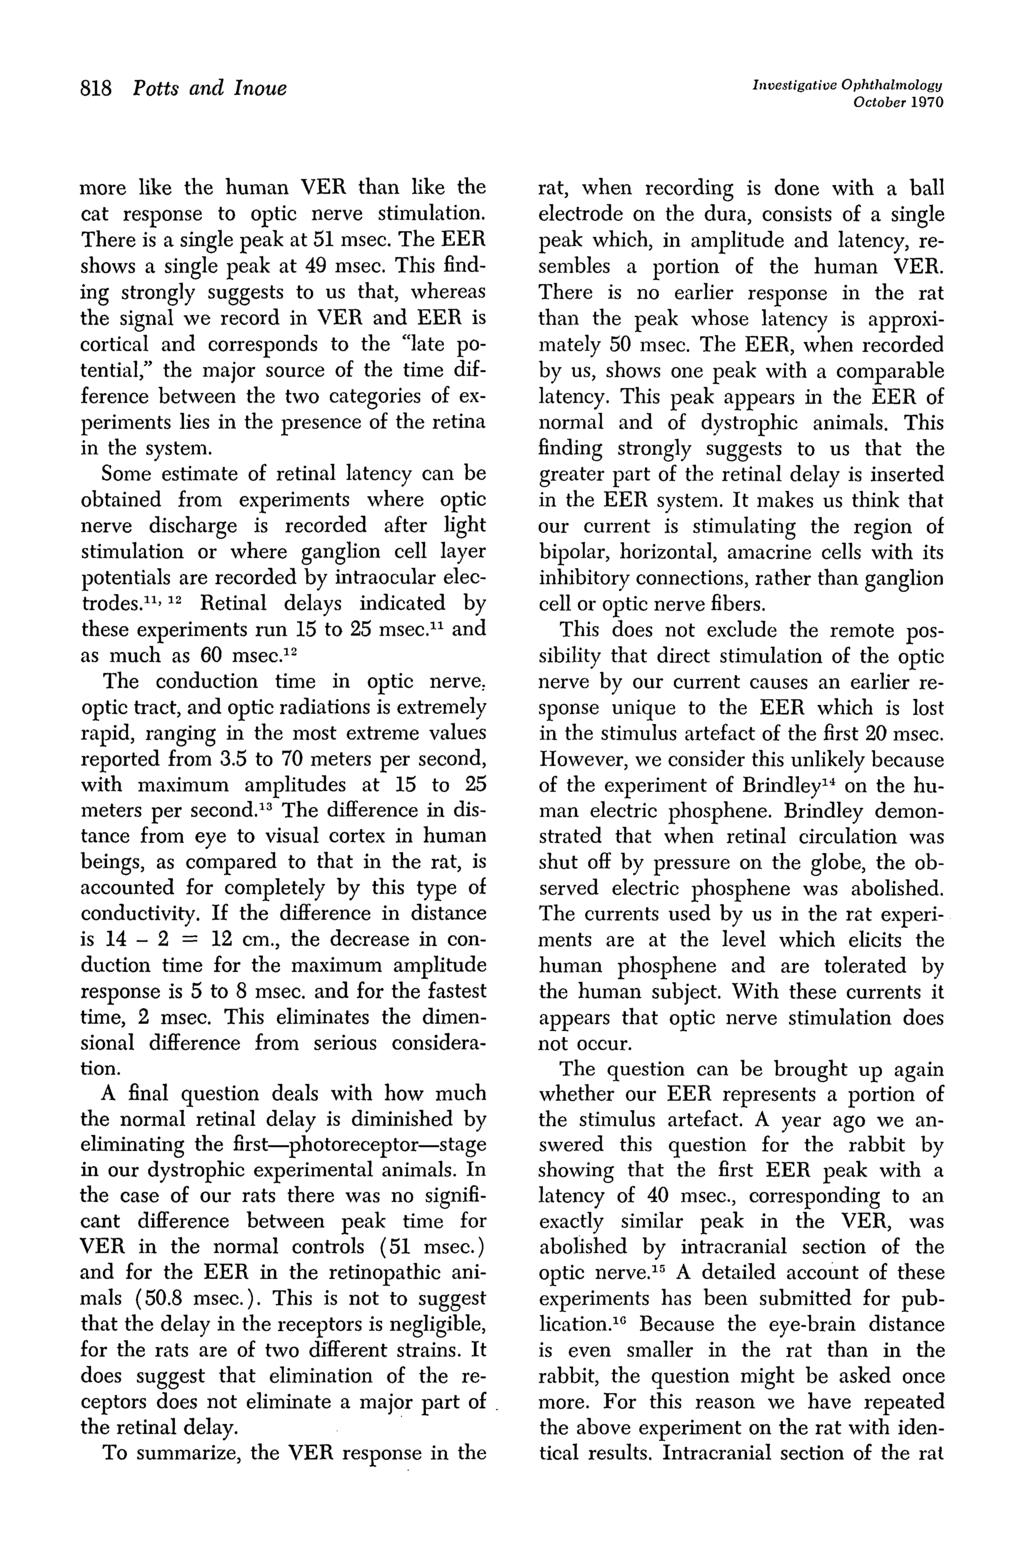 818 Potts and Inoue Investigative Ophthalmology October 1970 more like the human VER than like the cat response to optic nerve stimulation. There is a single peak at 51 msec.